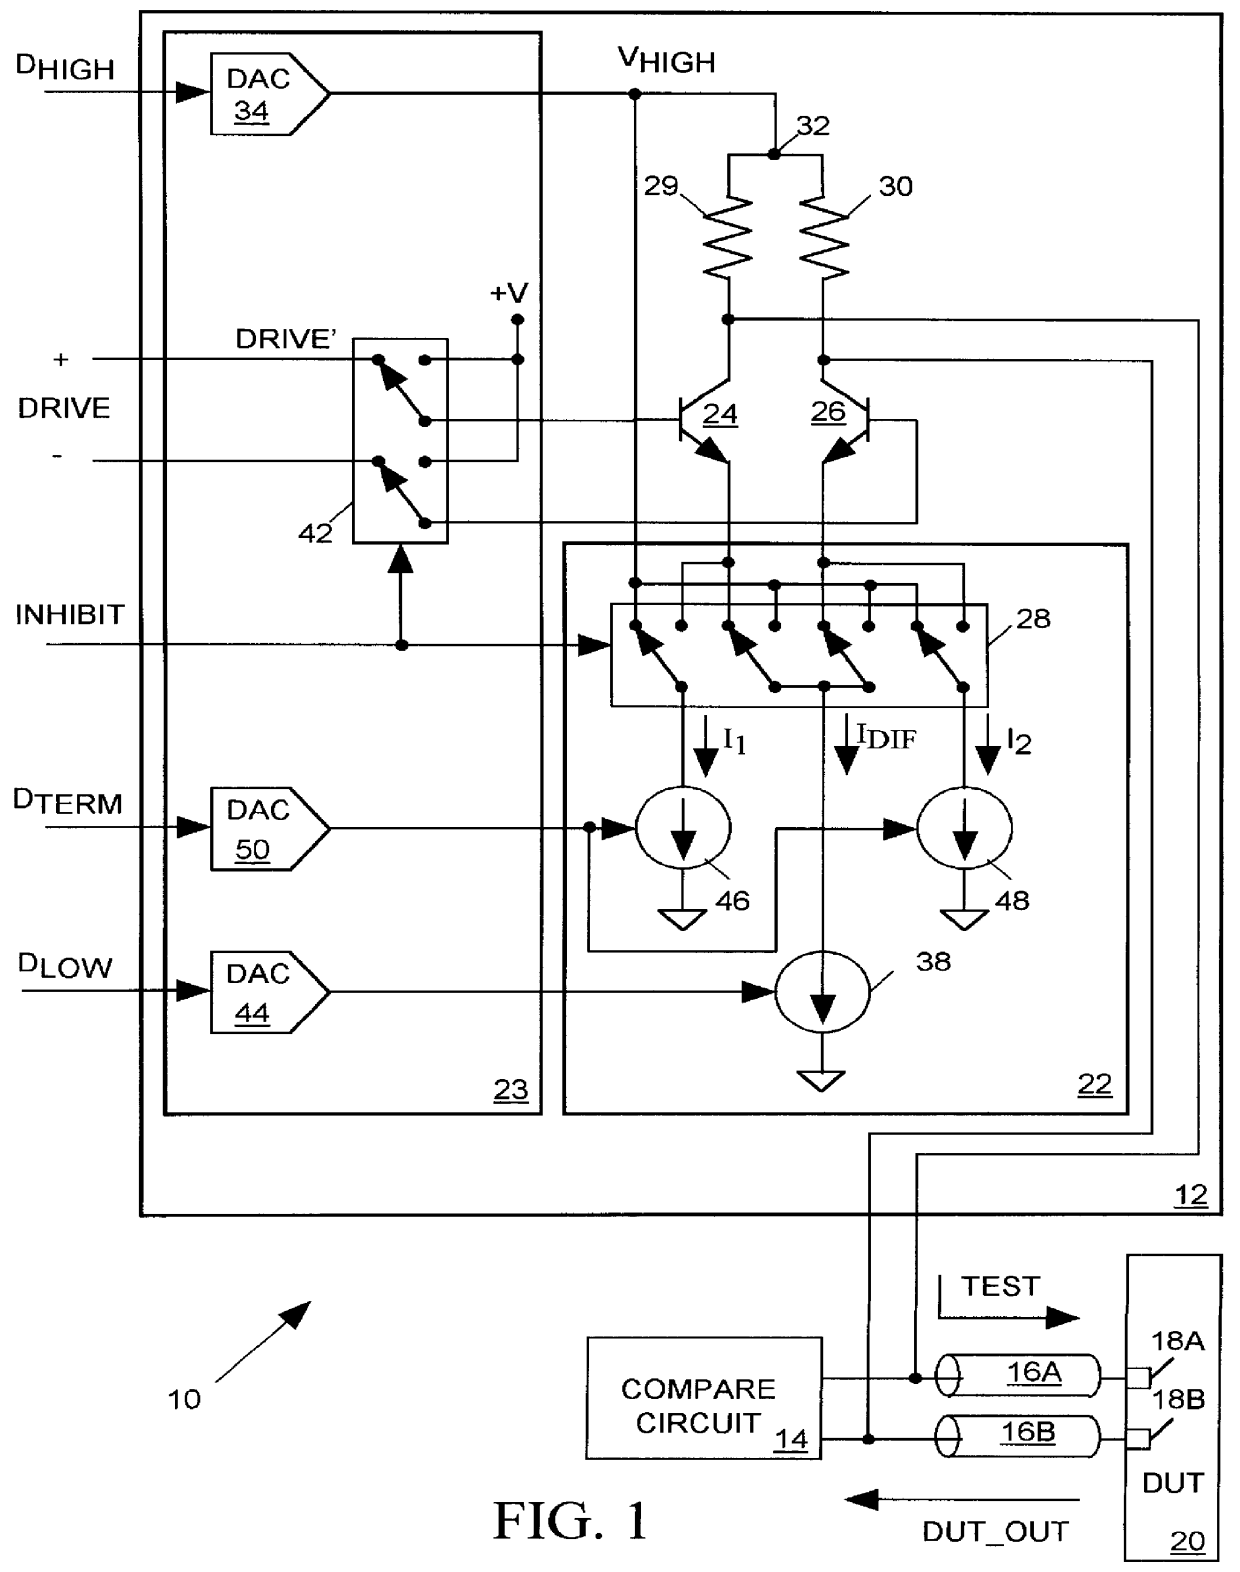 Inhibitable continuously-terminated differential drive circuit for an integrated circuit tester